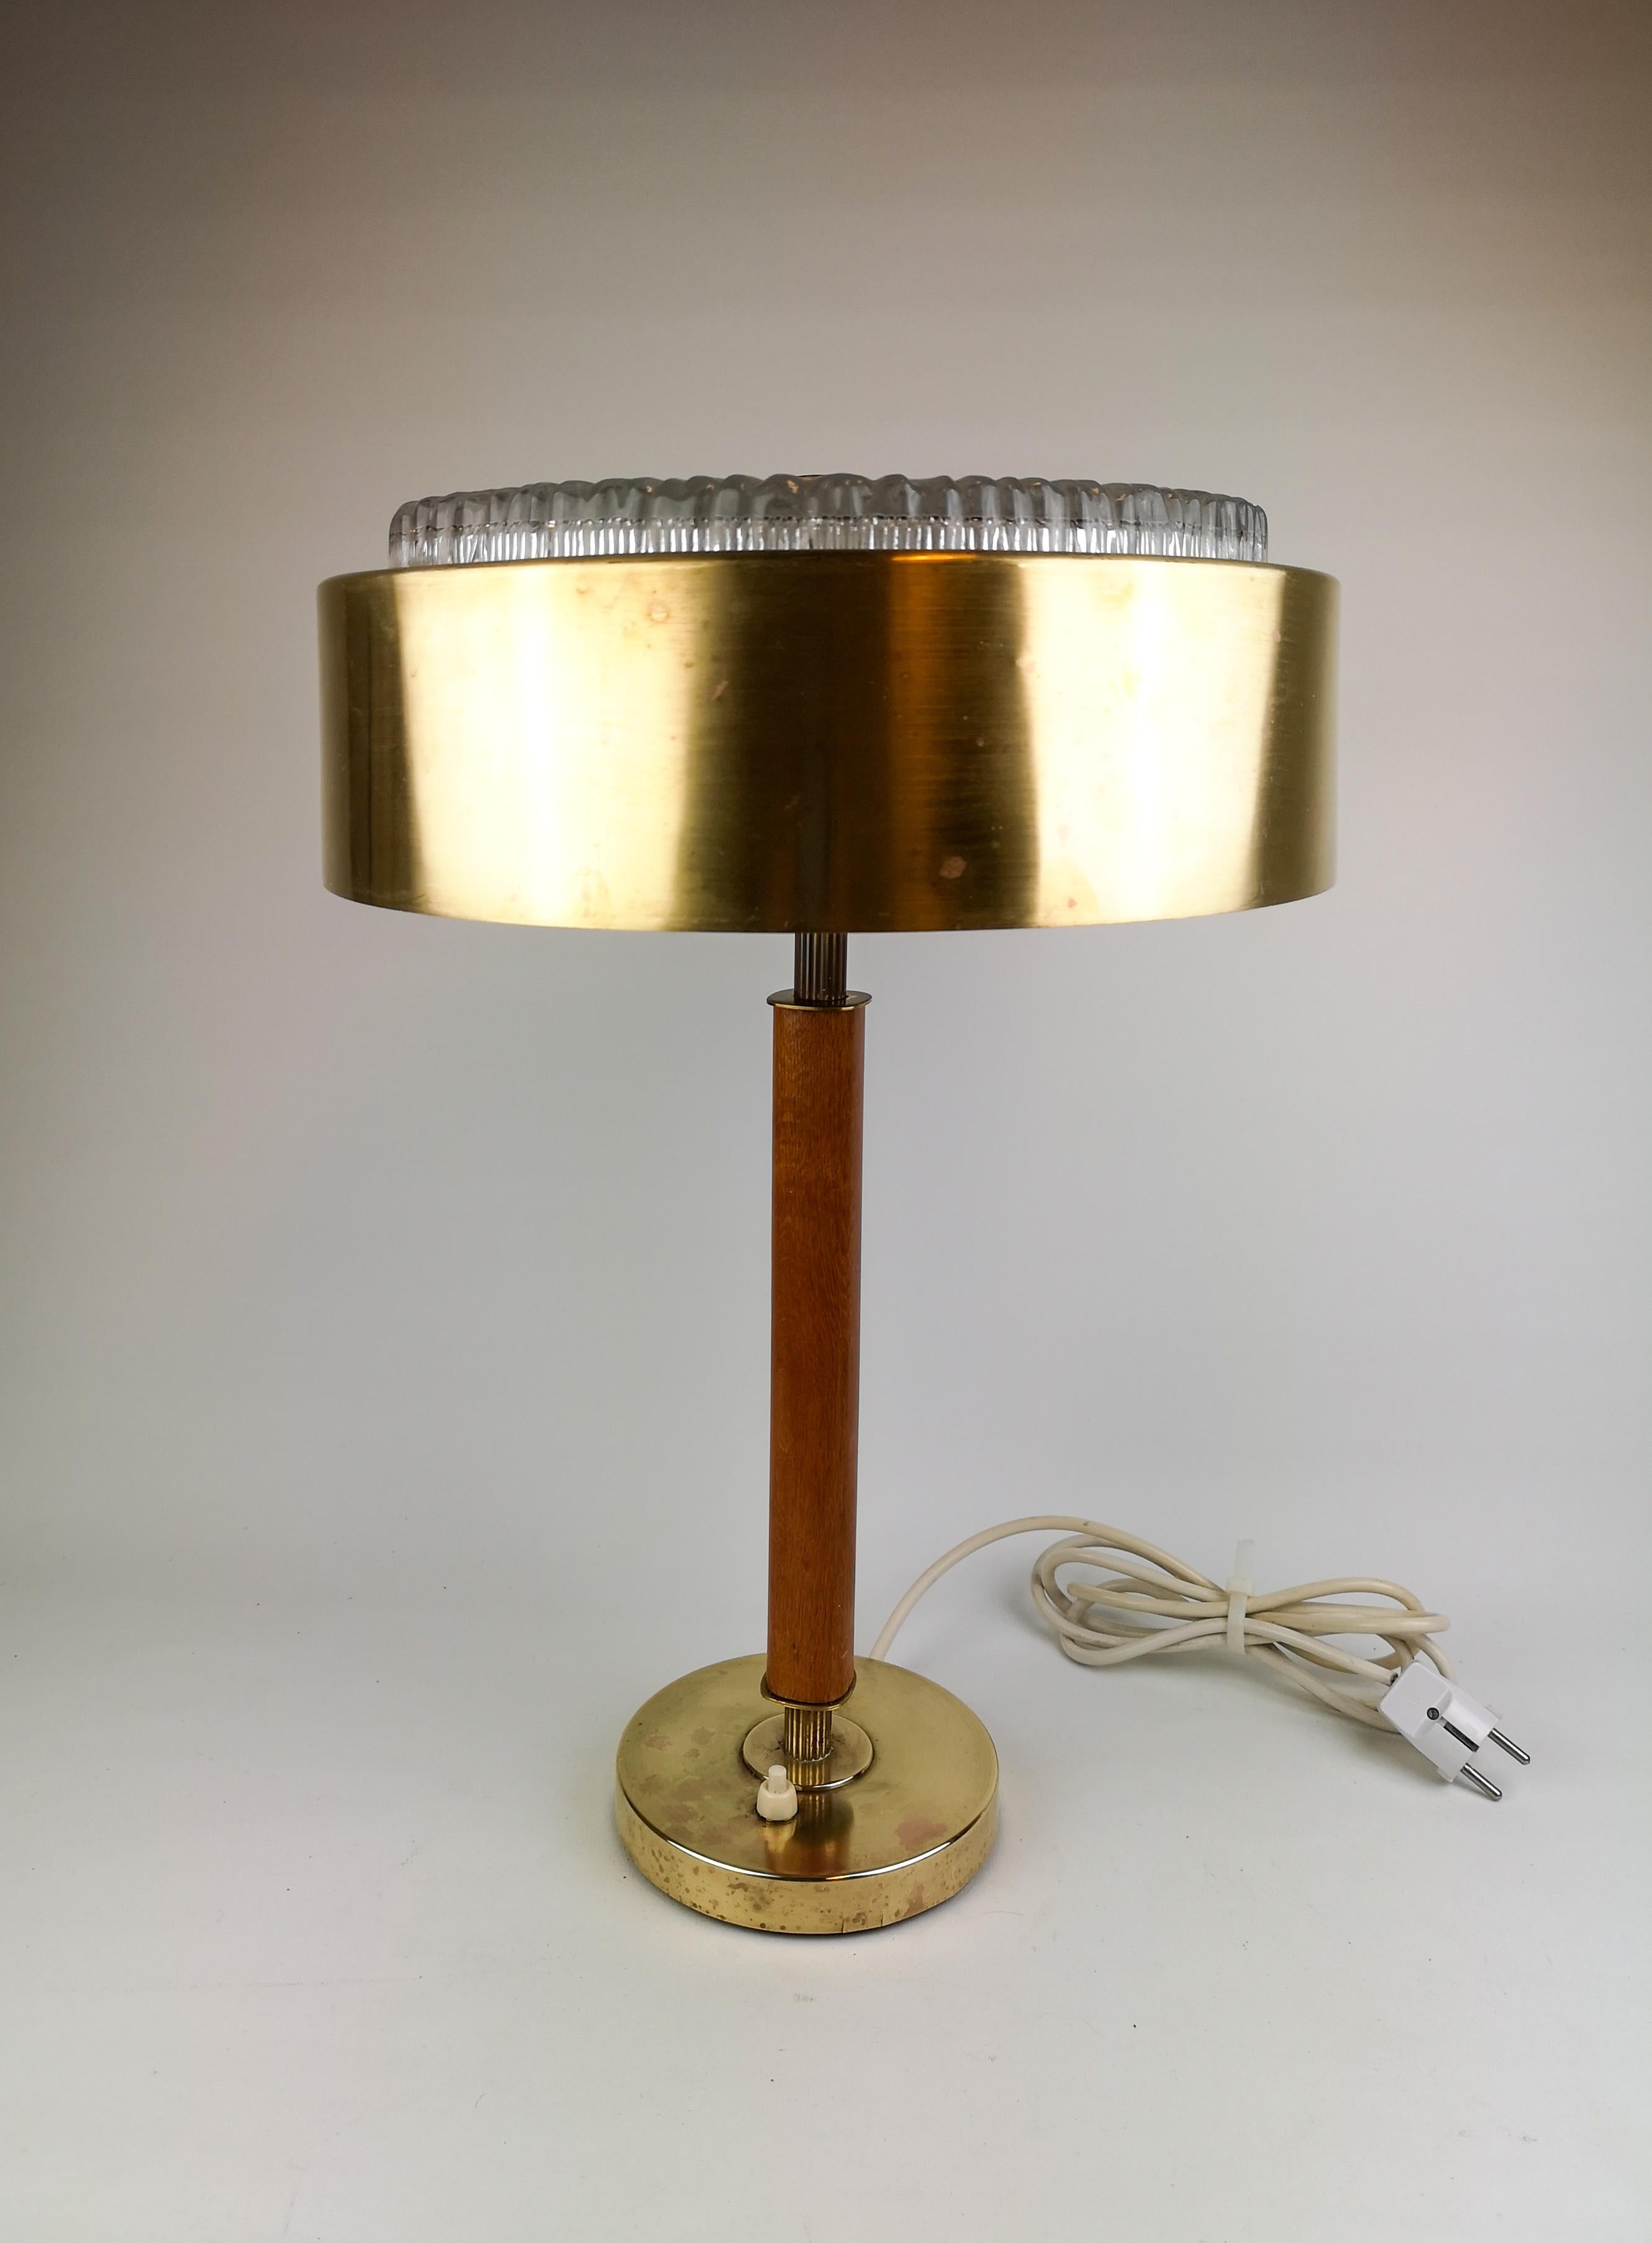 Wonderful table lamp in brushed brass and teak and the top made of crystal glass by Boréns, Sweden.
The lamp is heavy and gives a great impression with its brass cover to the crystal top. The wood makes the lamp a statement piece.

Condition: